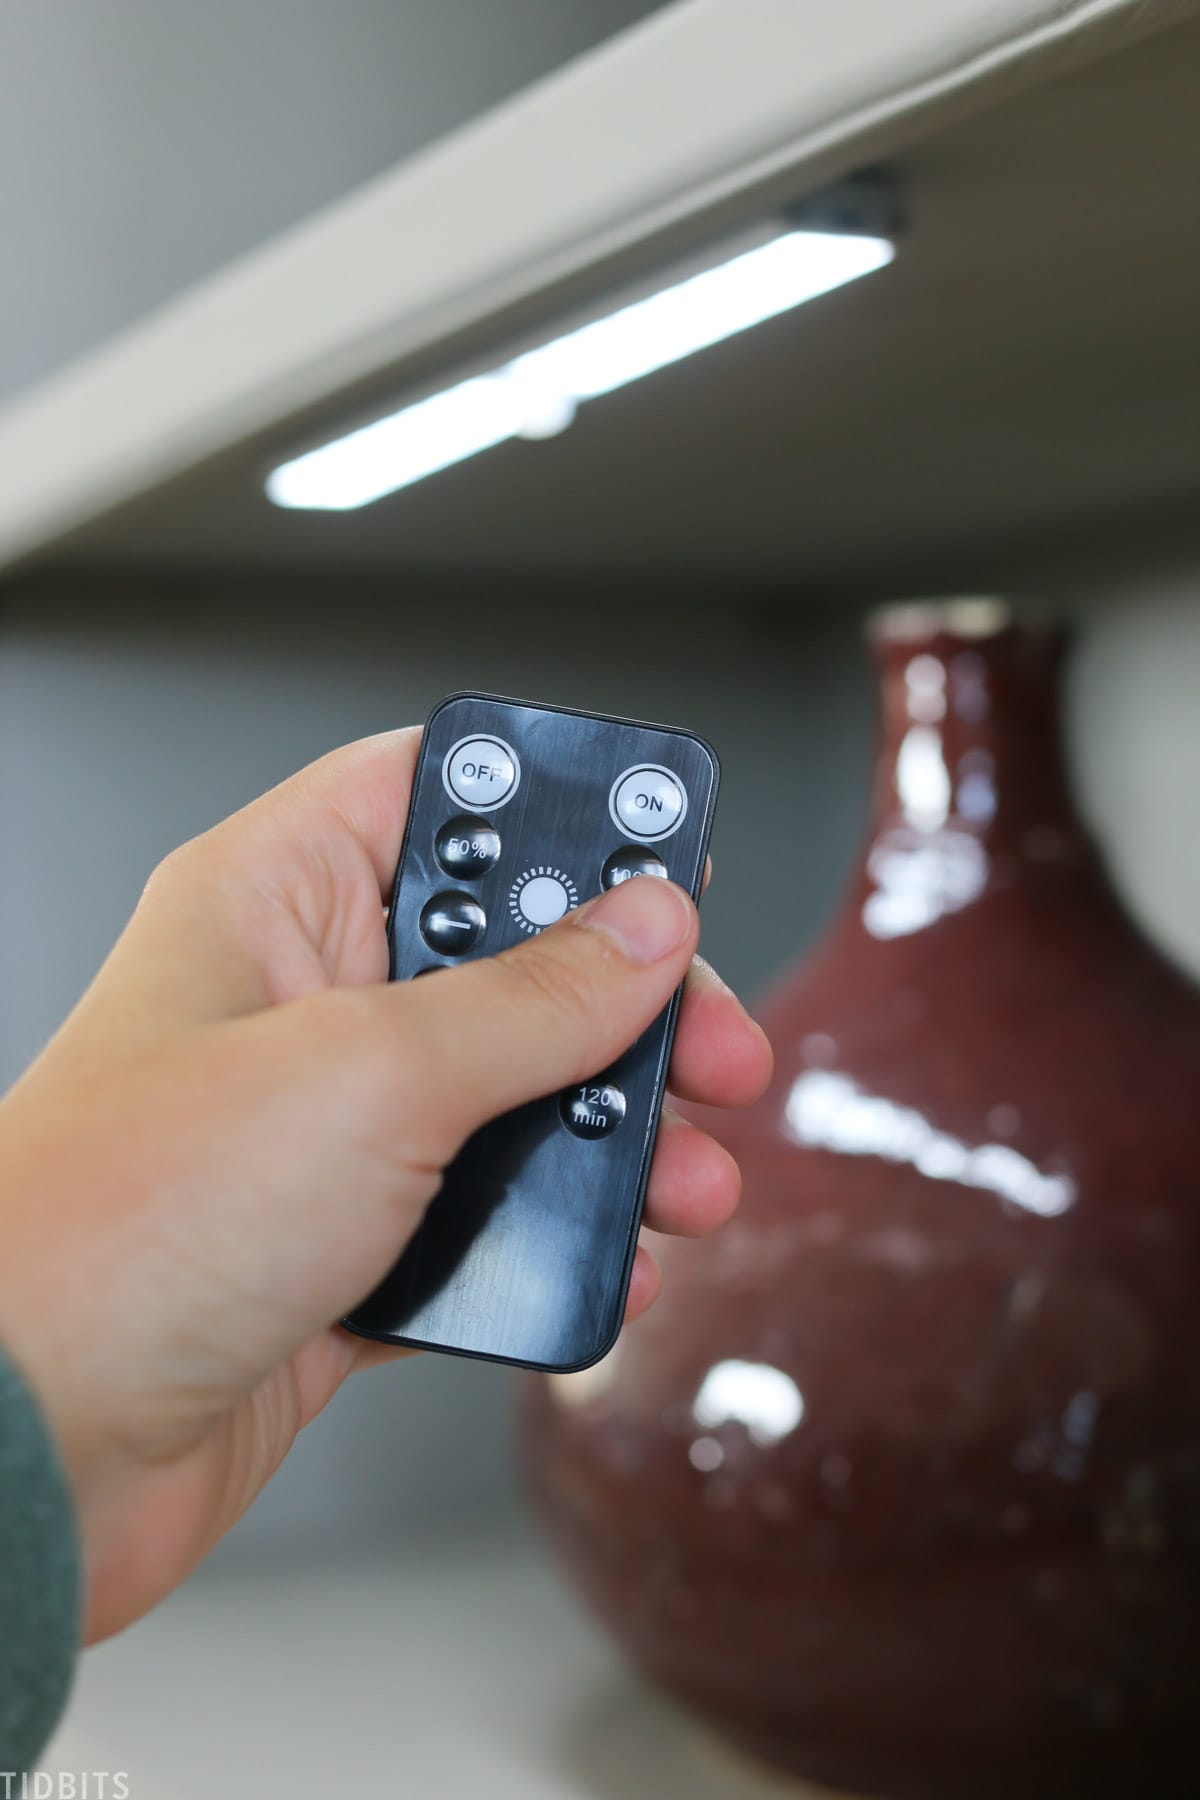 hand holding remote for under cabinet lighting